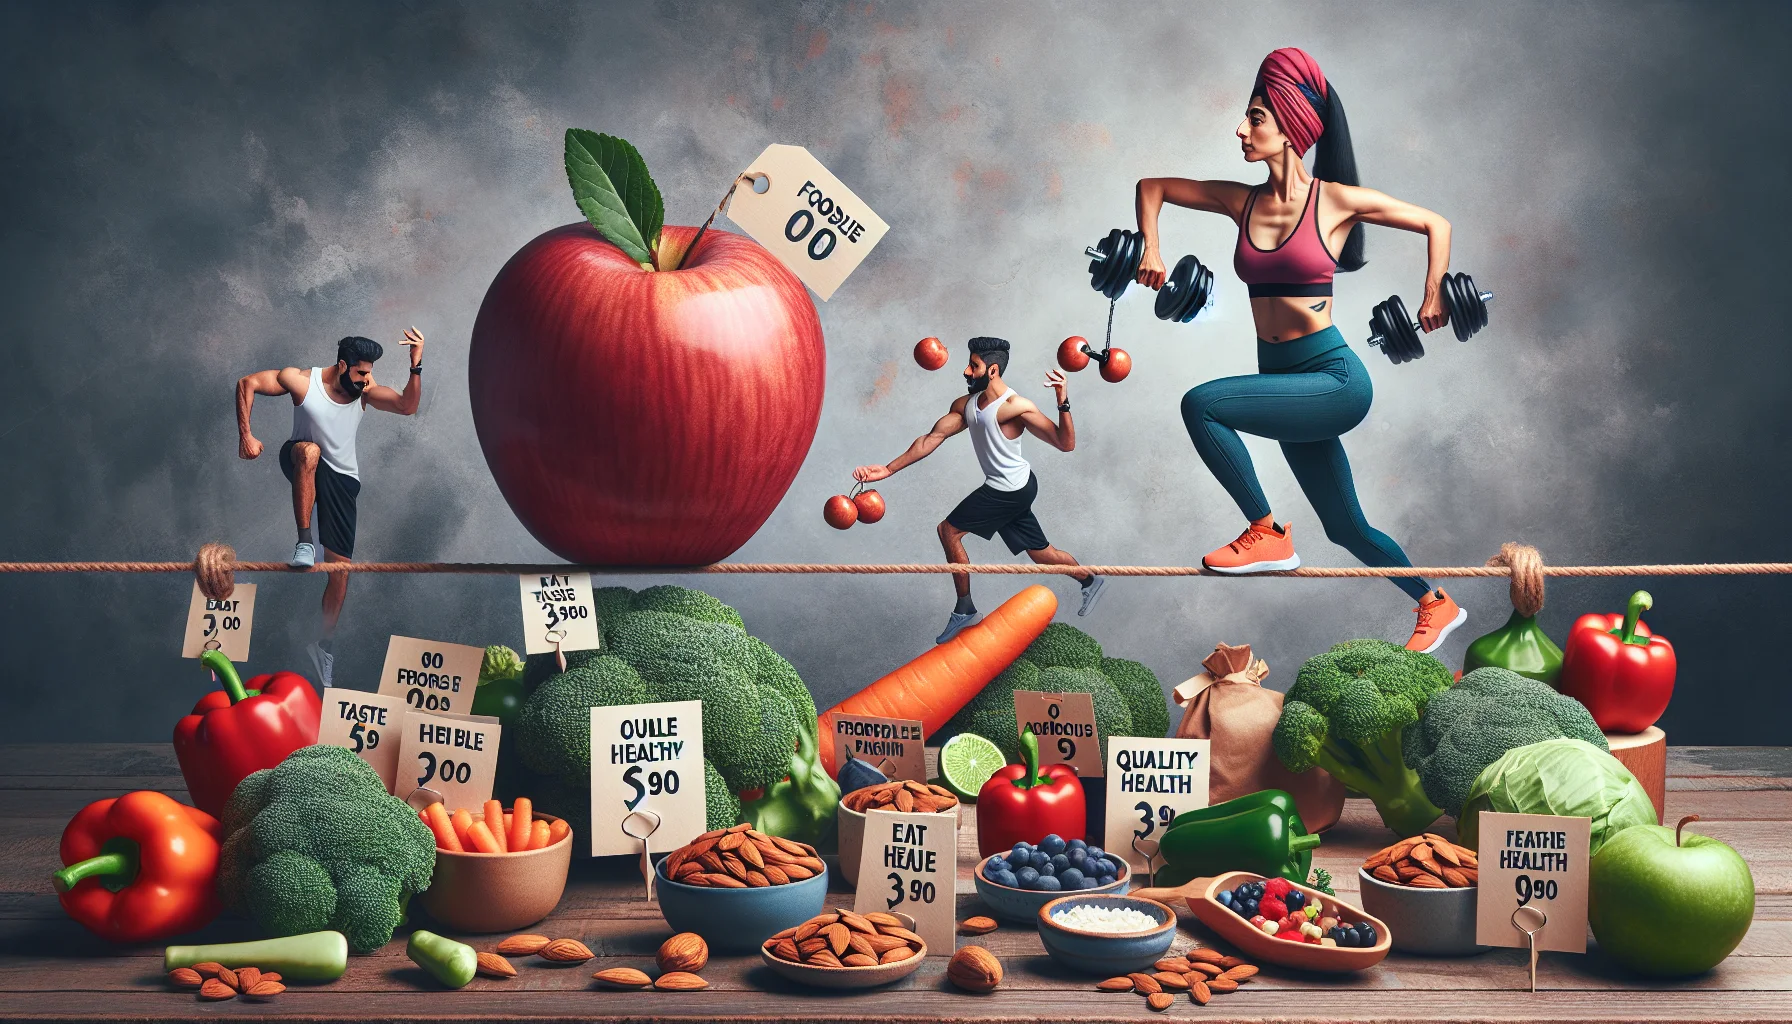 Create a humorous and realistic image showcasing 'Foodie Fitness'. The scene should depict the interesting balancing act between taste and health. Imagine a creative scenario where a South Asian woman in sports attire is trying to balance a huge apple and a dumbbell on a tightrope, representing the delicate balance of eating healthy. Surrounding her, we see quality healthy foods like broccoli, carrots, and almonds, each tagged with significantly low price tags, suggesting the concept of affordable healthy eating. Let the image motivate people to eat healthy for less money.